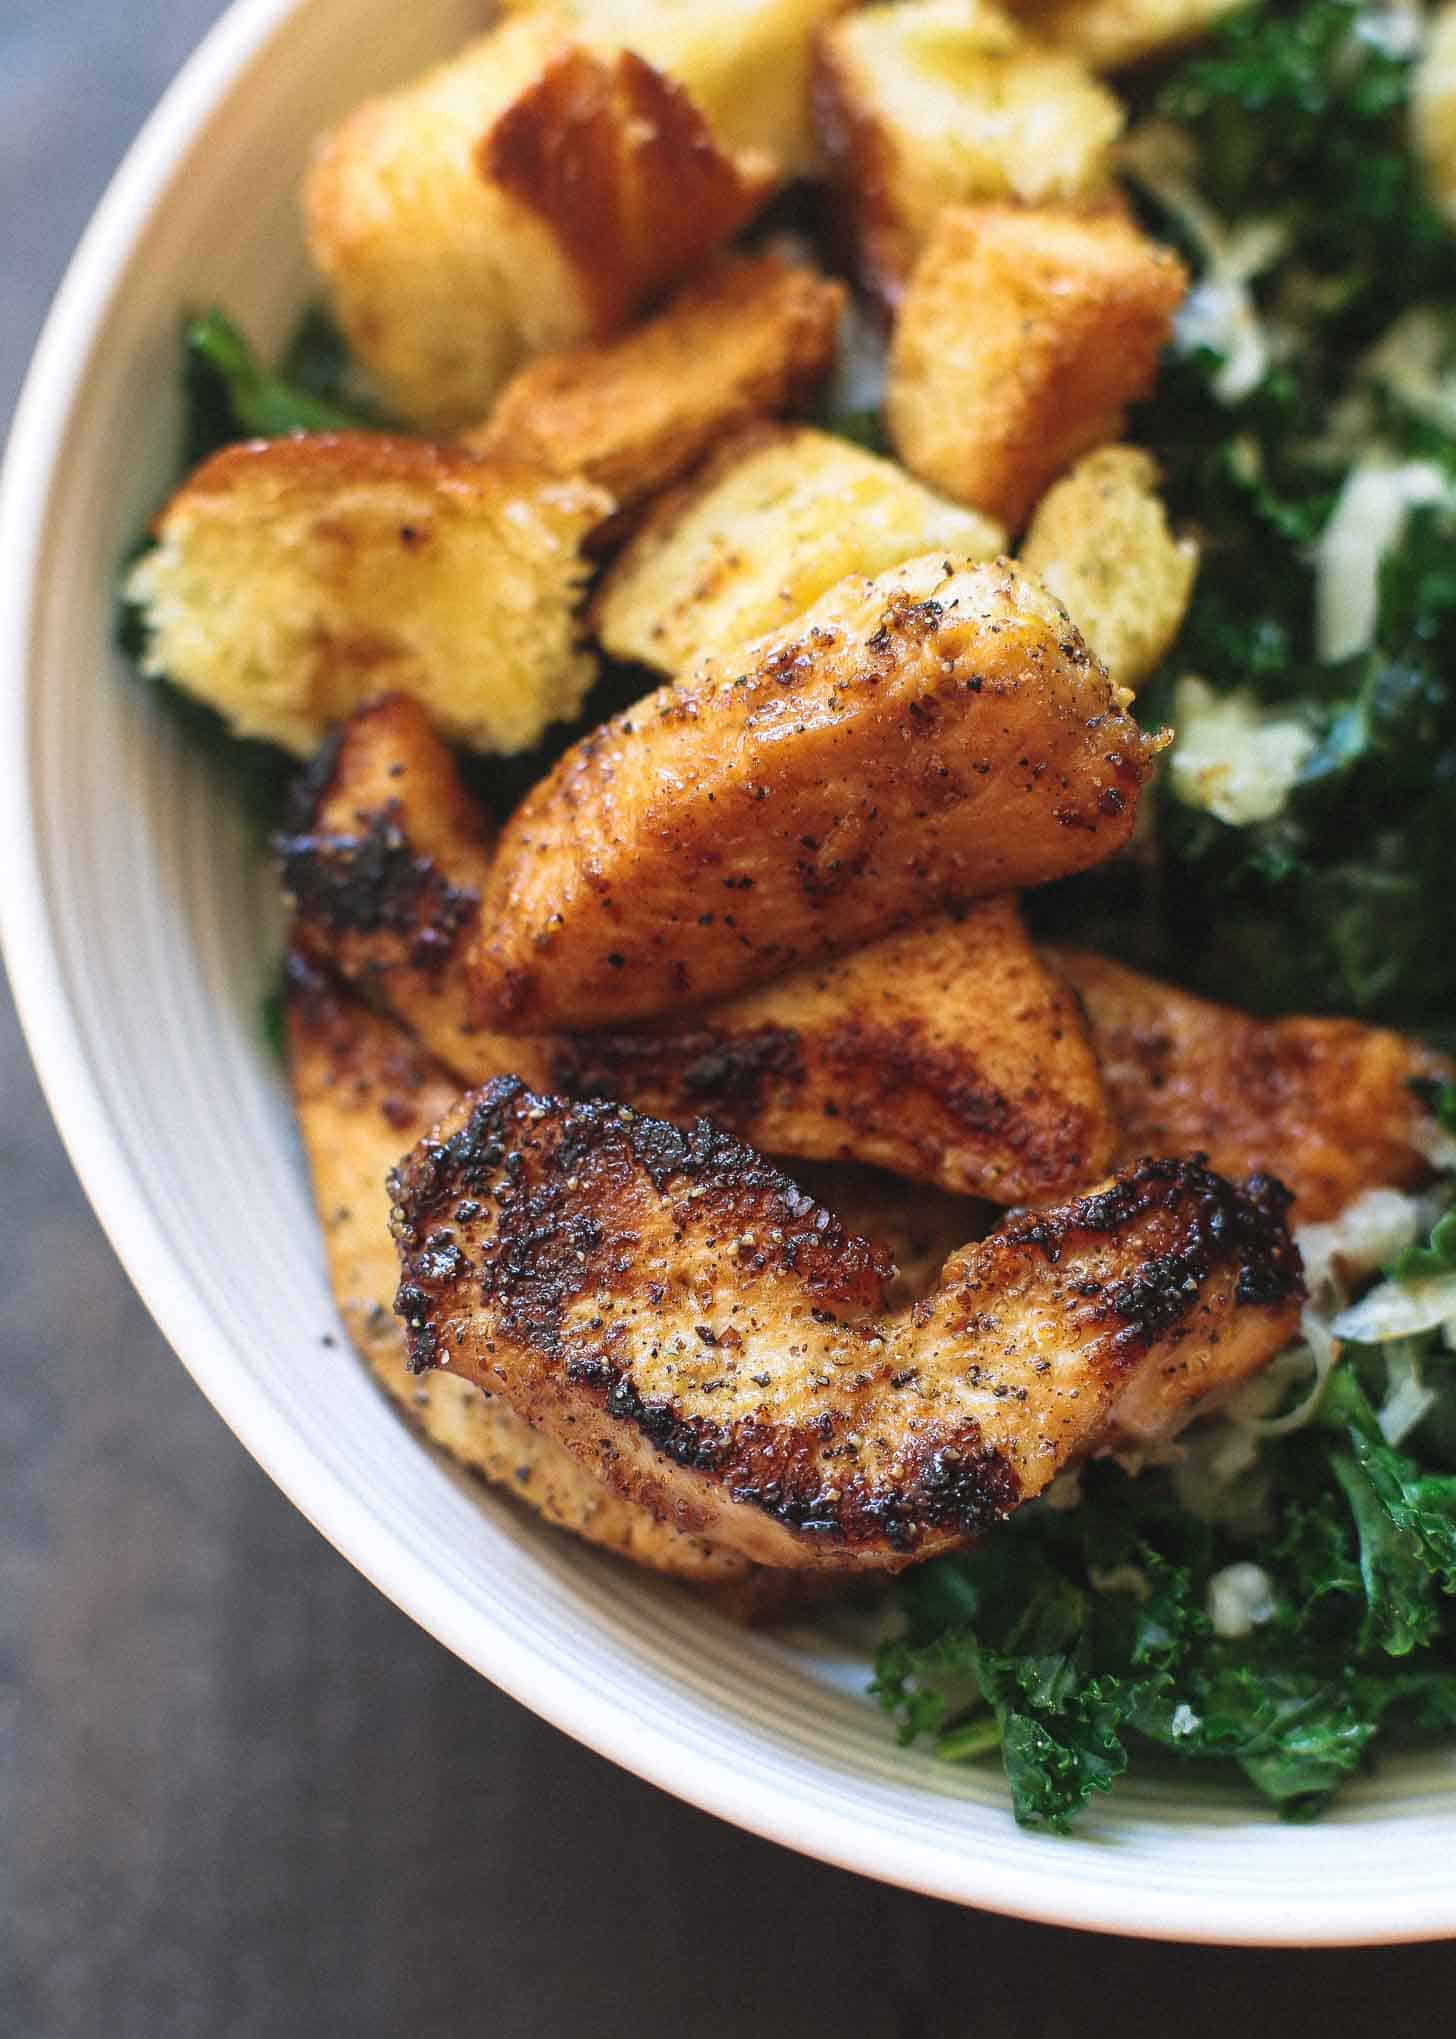 Kale Salad with Chicken in a white bowl